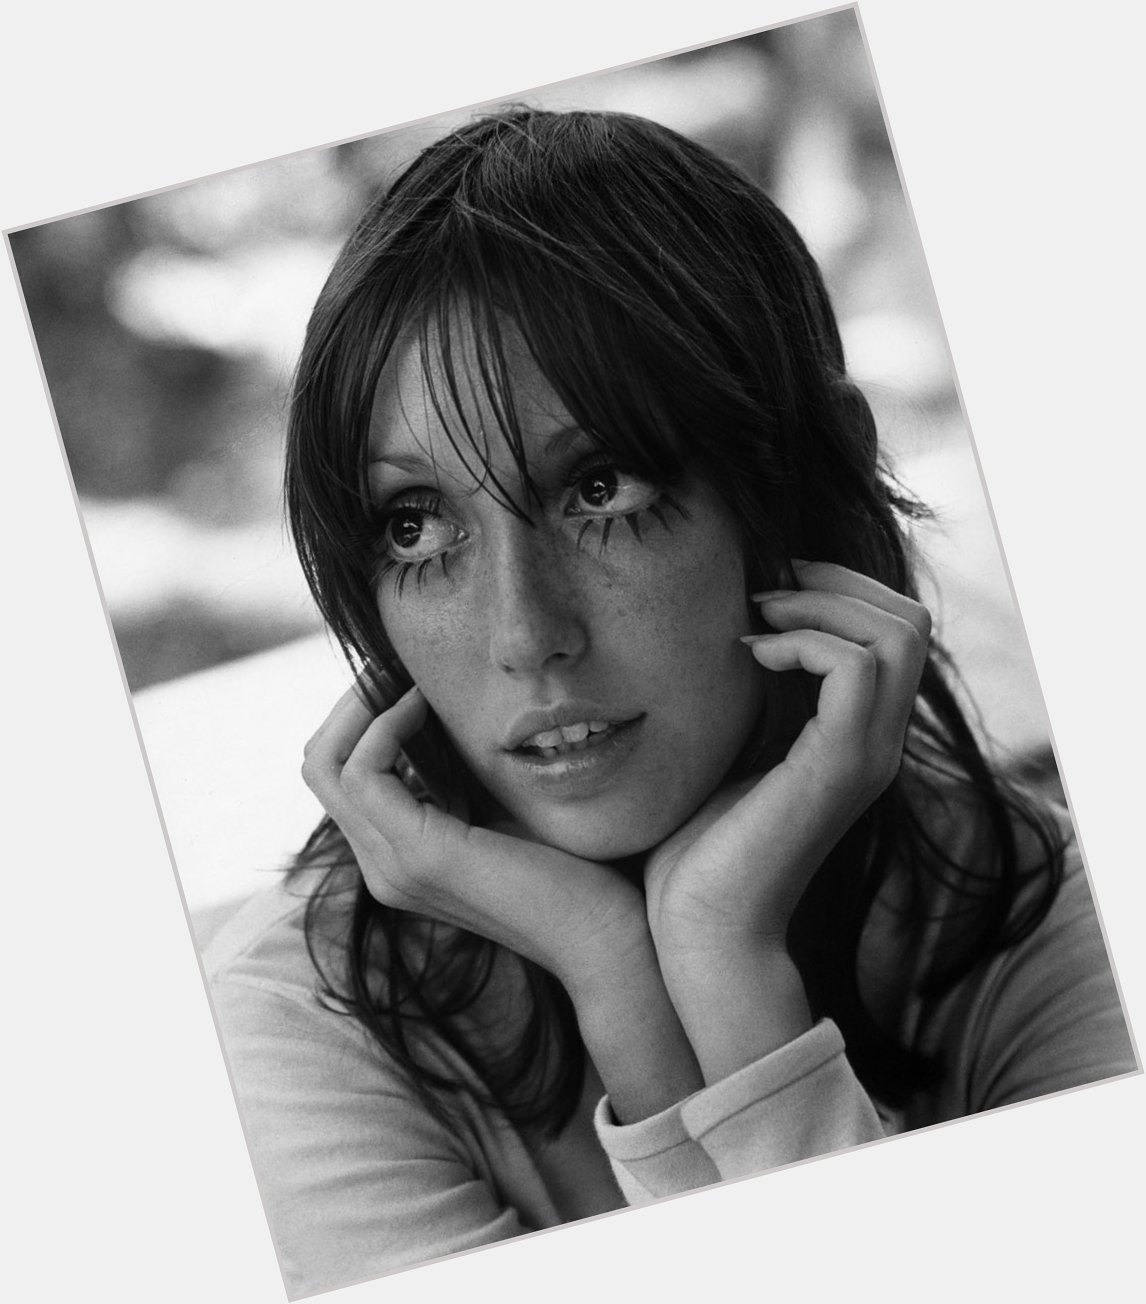 Happy birthday Shelley Duvall. Thanks for teaching me how to pose for school pictures 